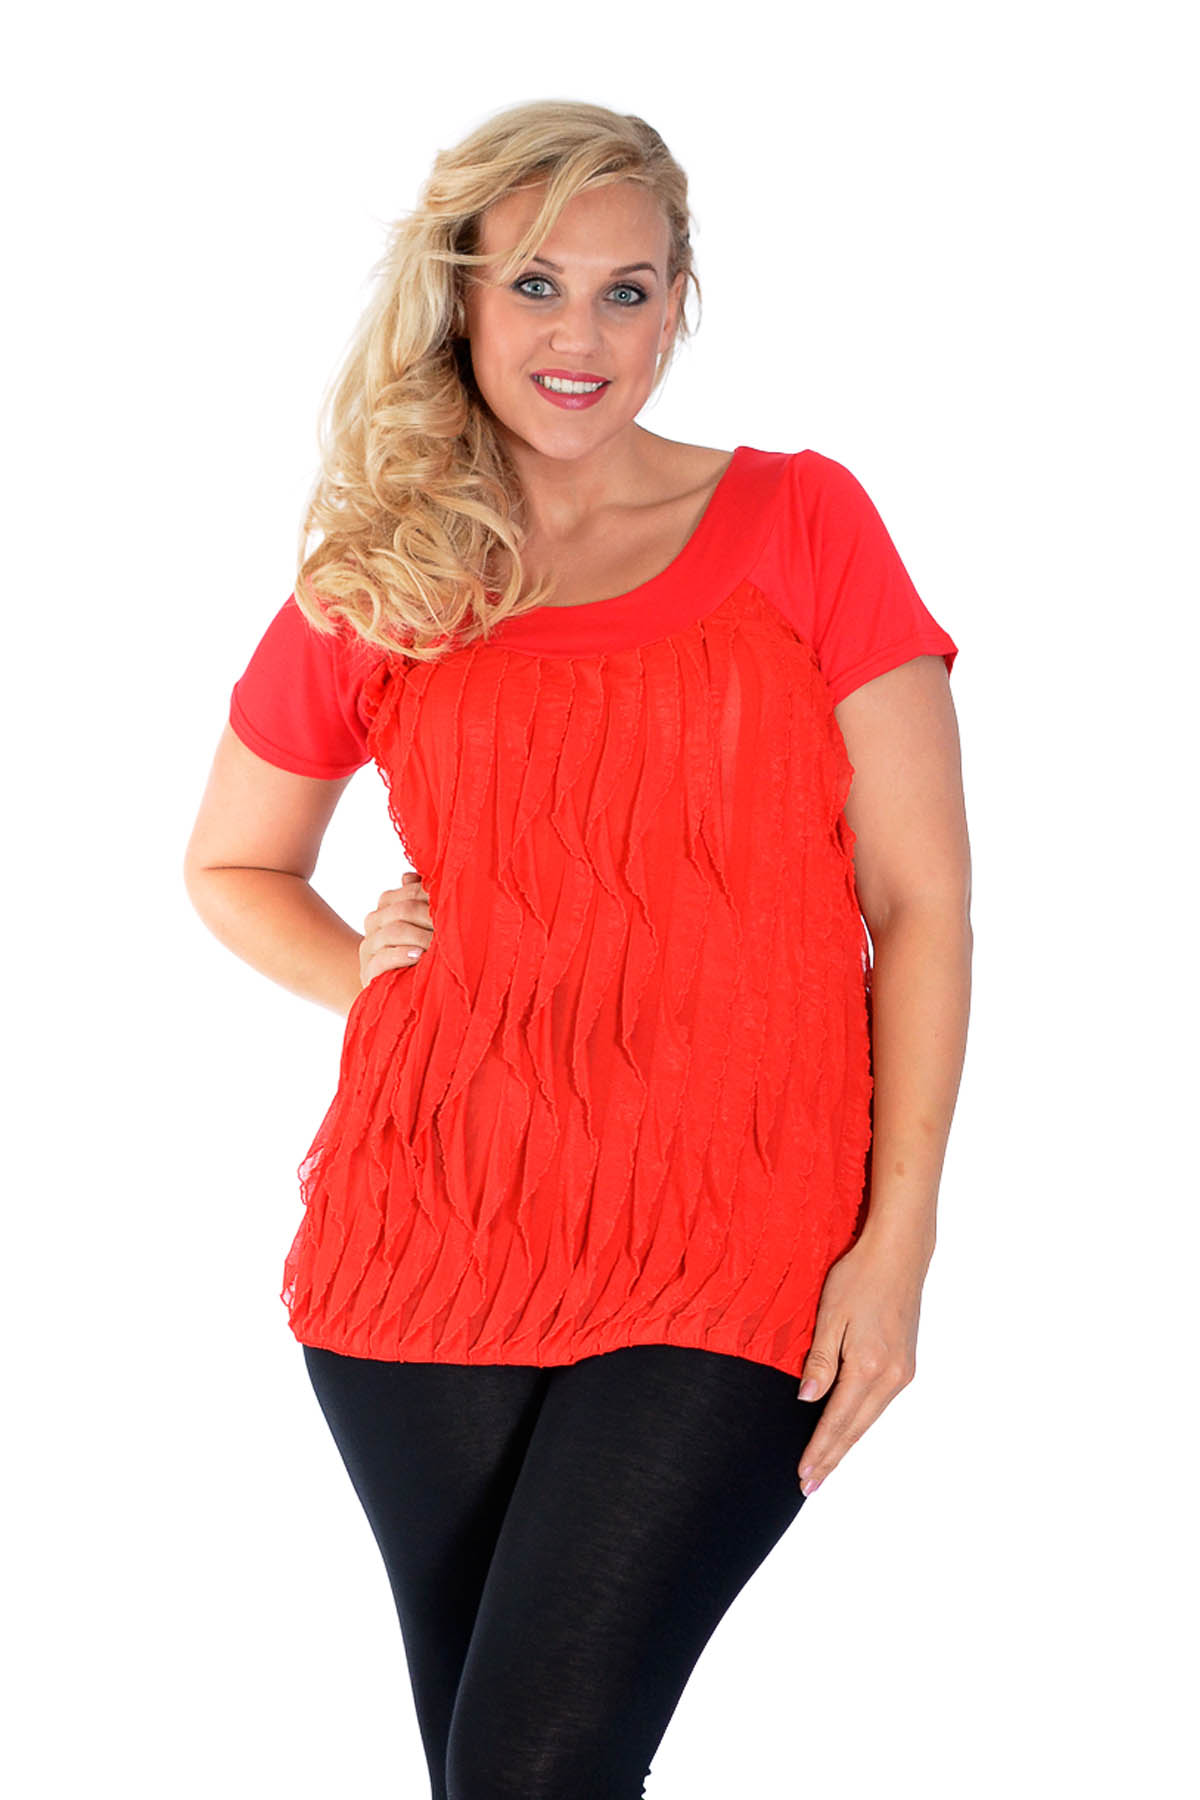 New Womens Top Plus Size Ladies Ruffle Short Sleeve Tunic Sale Stretch Nouvelle | eBay